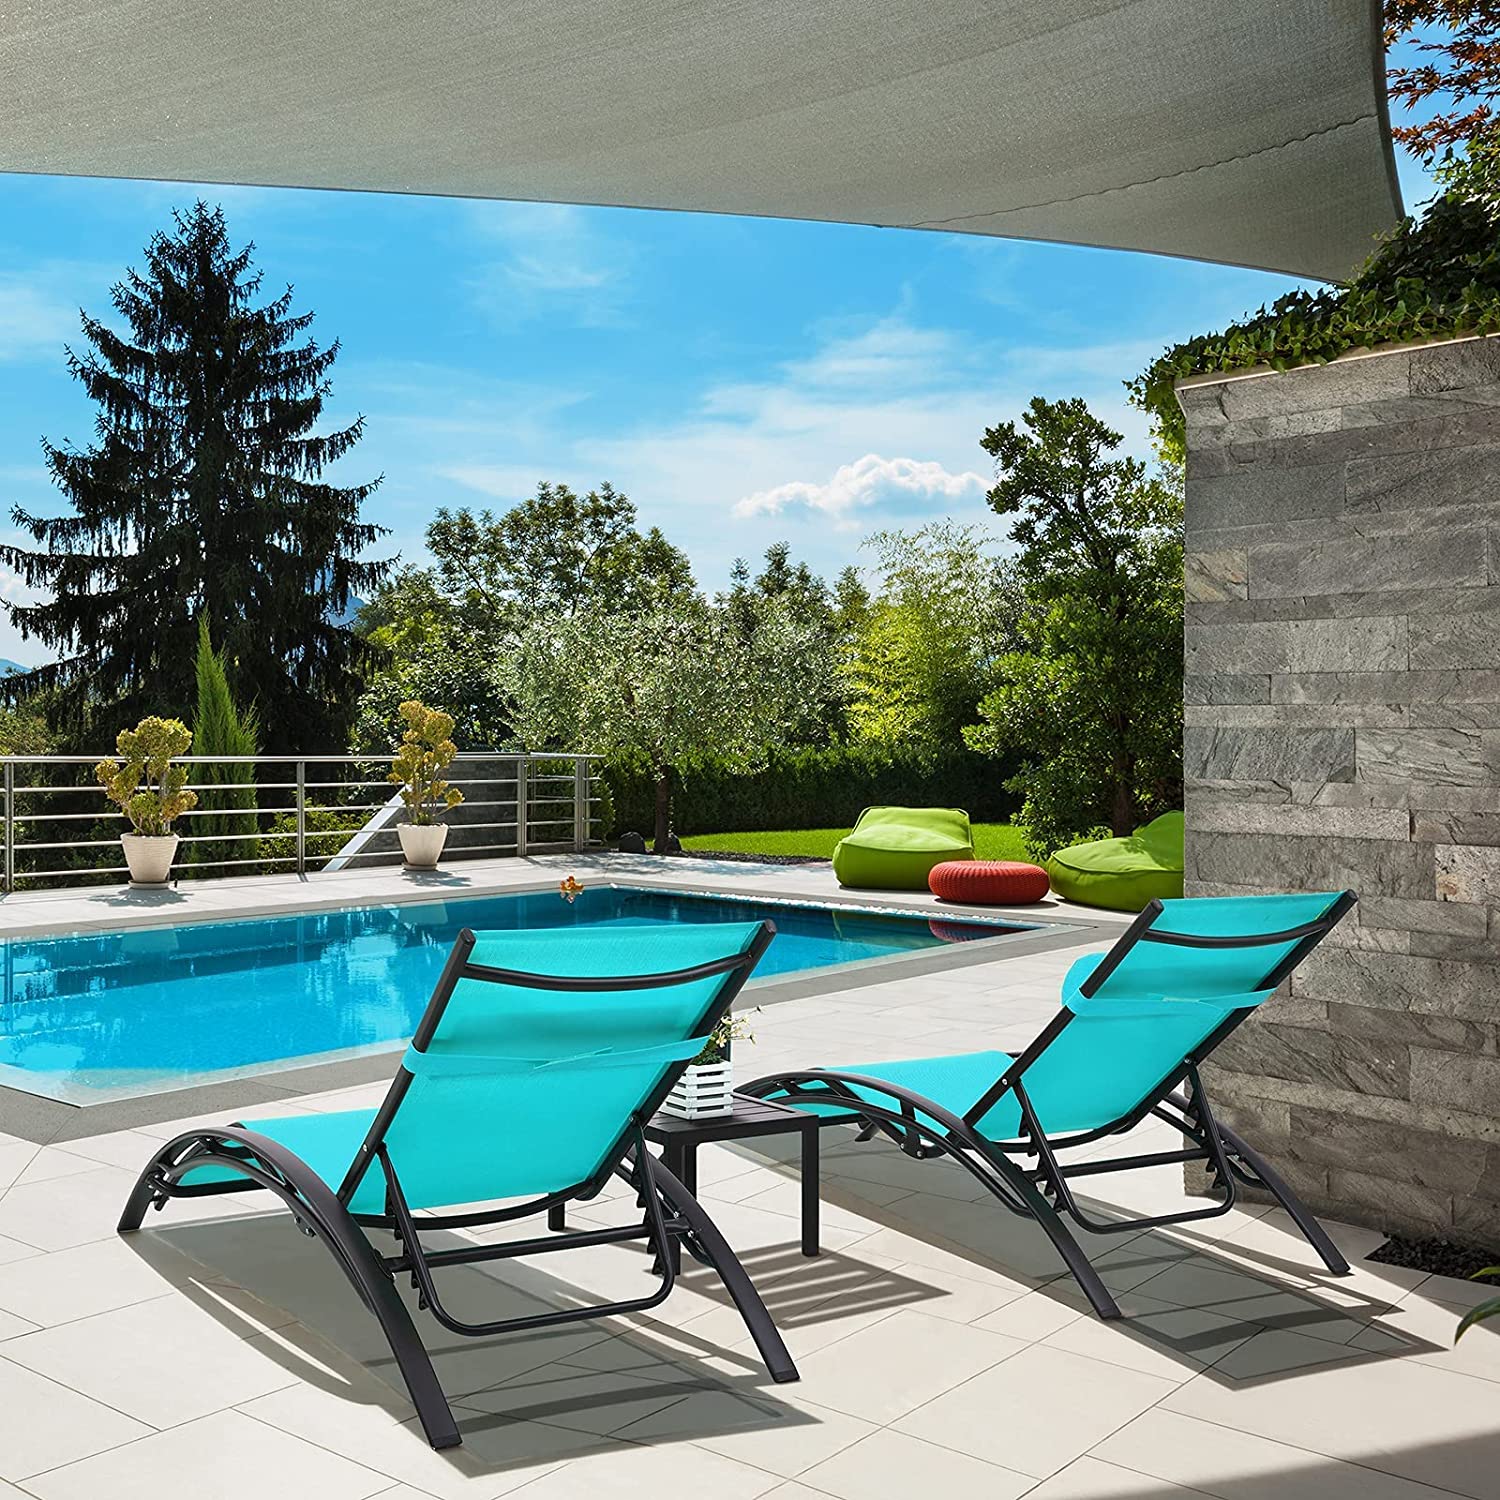 Increkid Patio Lounge Chairs Adjustable Pool Chaise Lounge Chairs with Table - image 5 of 9